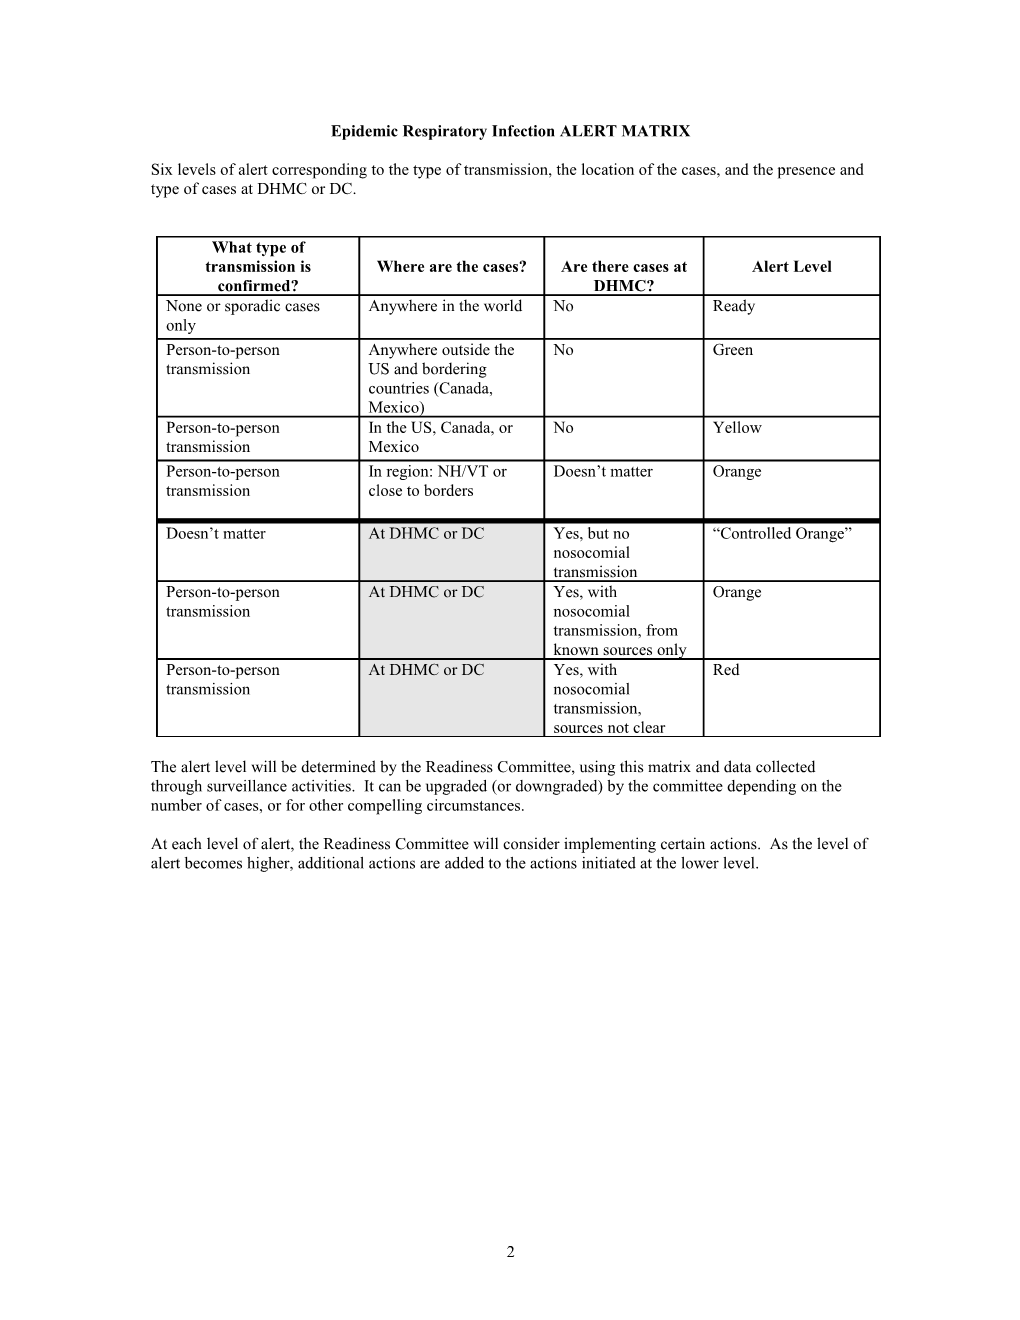 Readiness Plan for Epidemic Respiratory Infection